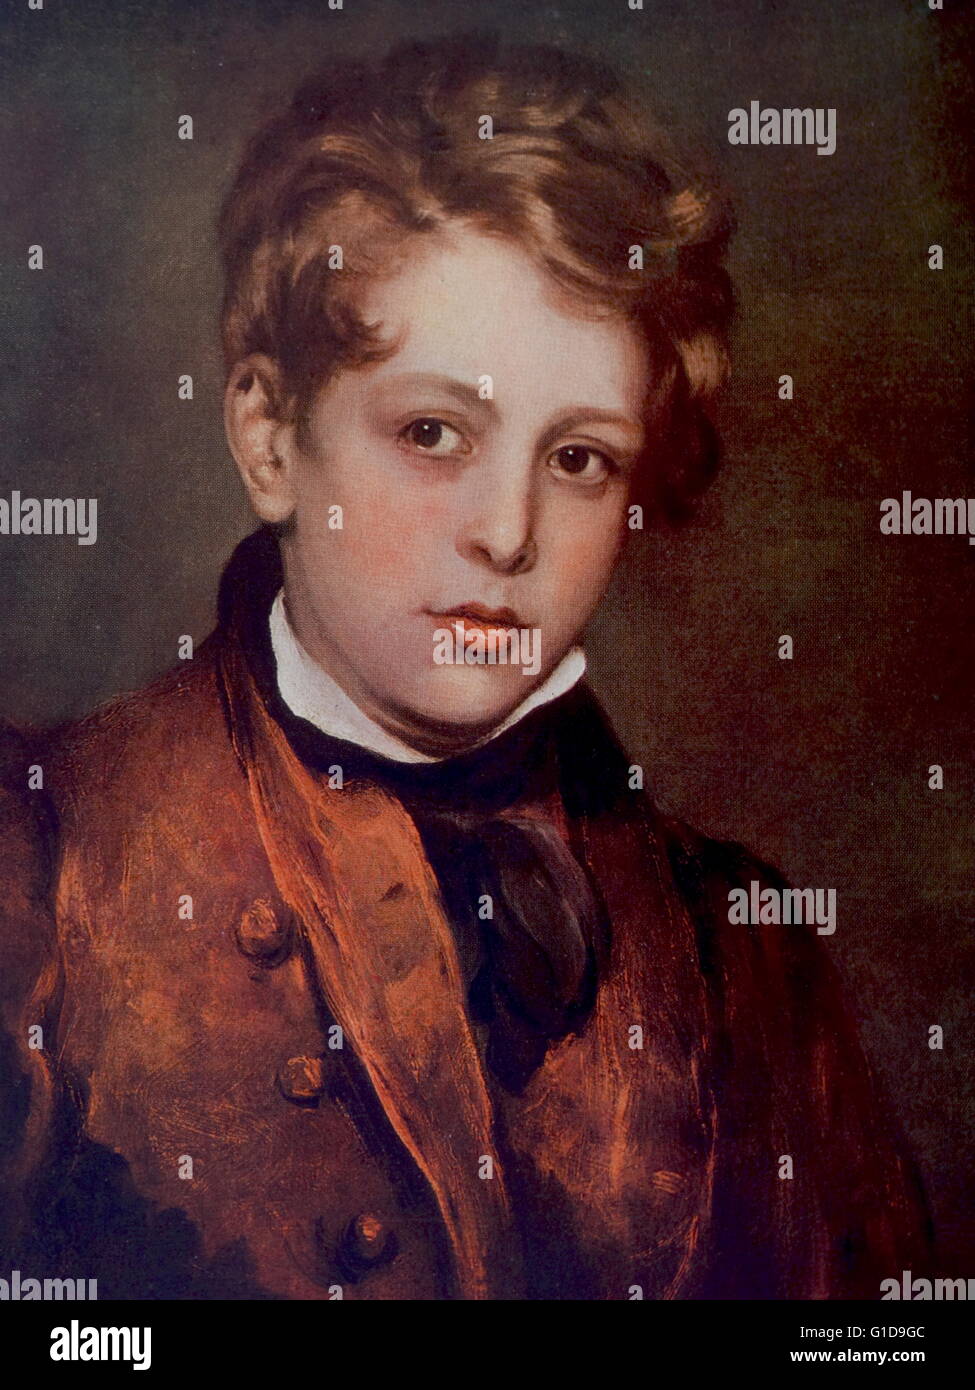 George Gordon Byron as a boy by Sir Thomas Lawrence. Byron 1788 – 1824, Lord Byron, English poet and a leading figure in the Romantic movement Stock Photo